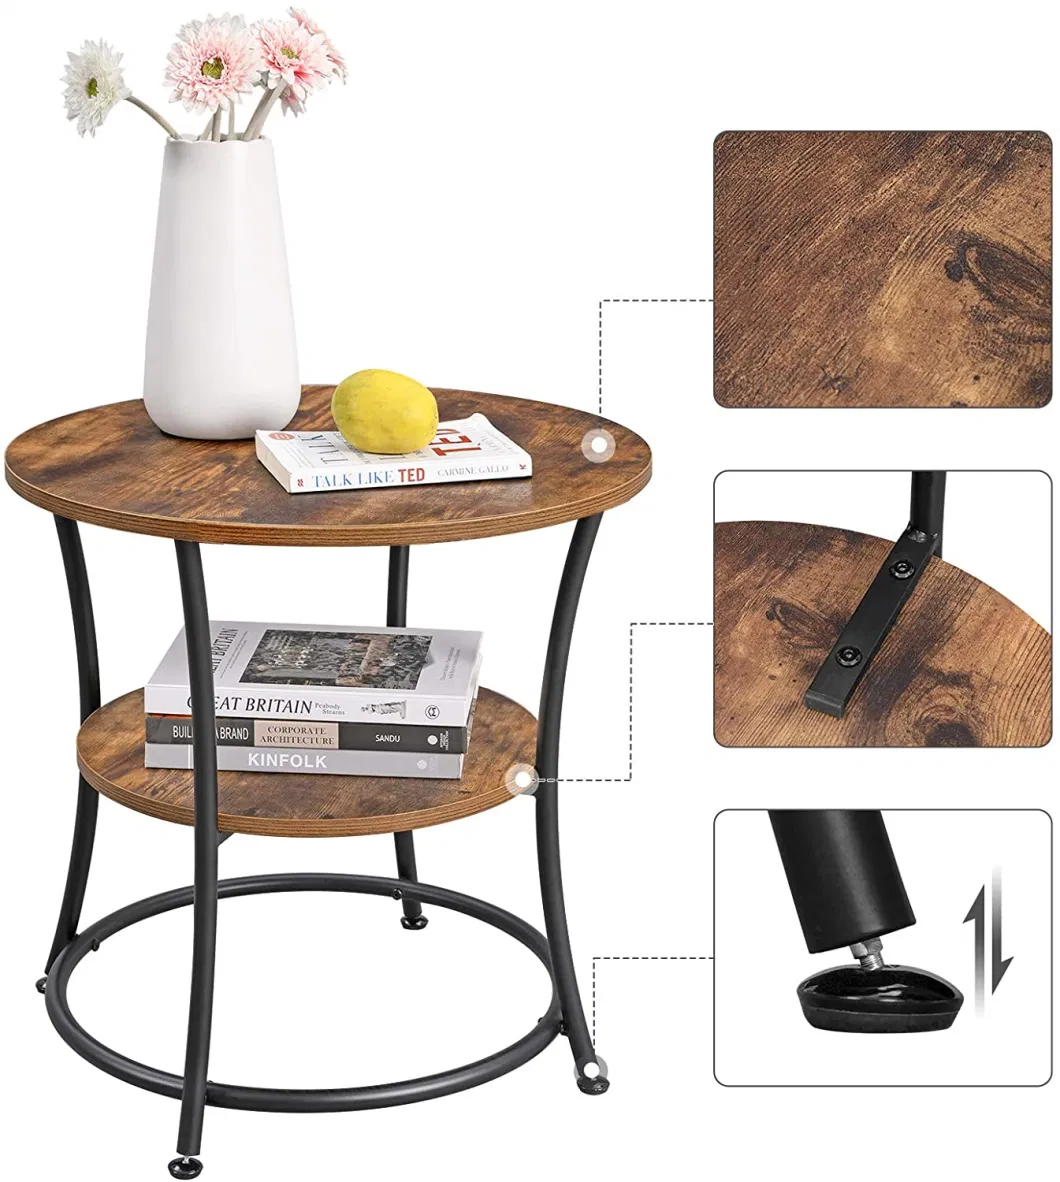 Unique Design Brown Color Classic Accent Furniture Usage for Dining Room Side Table